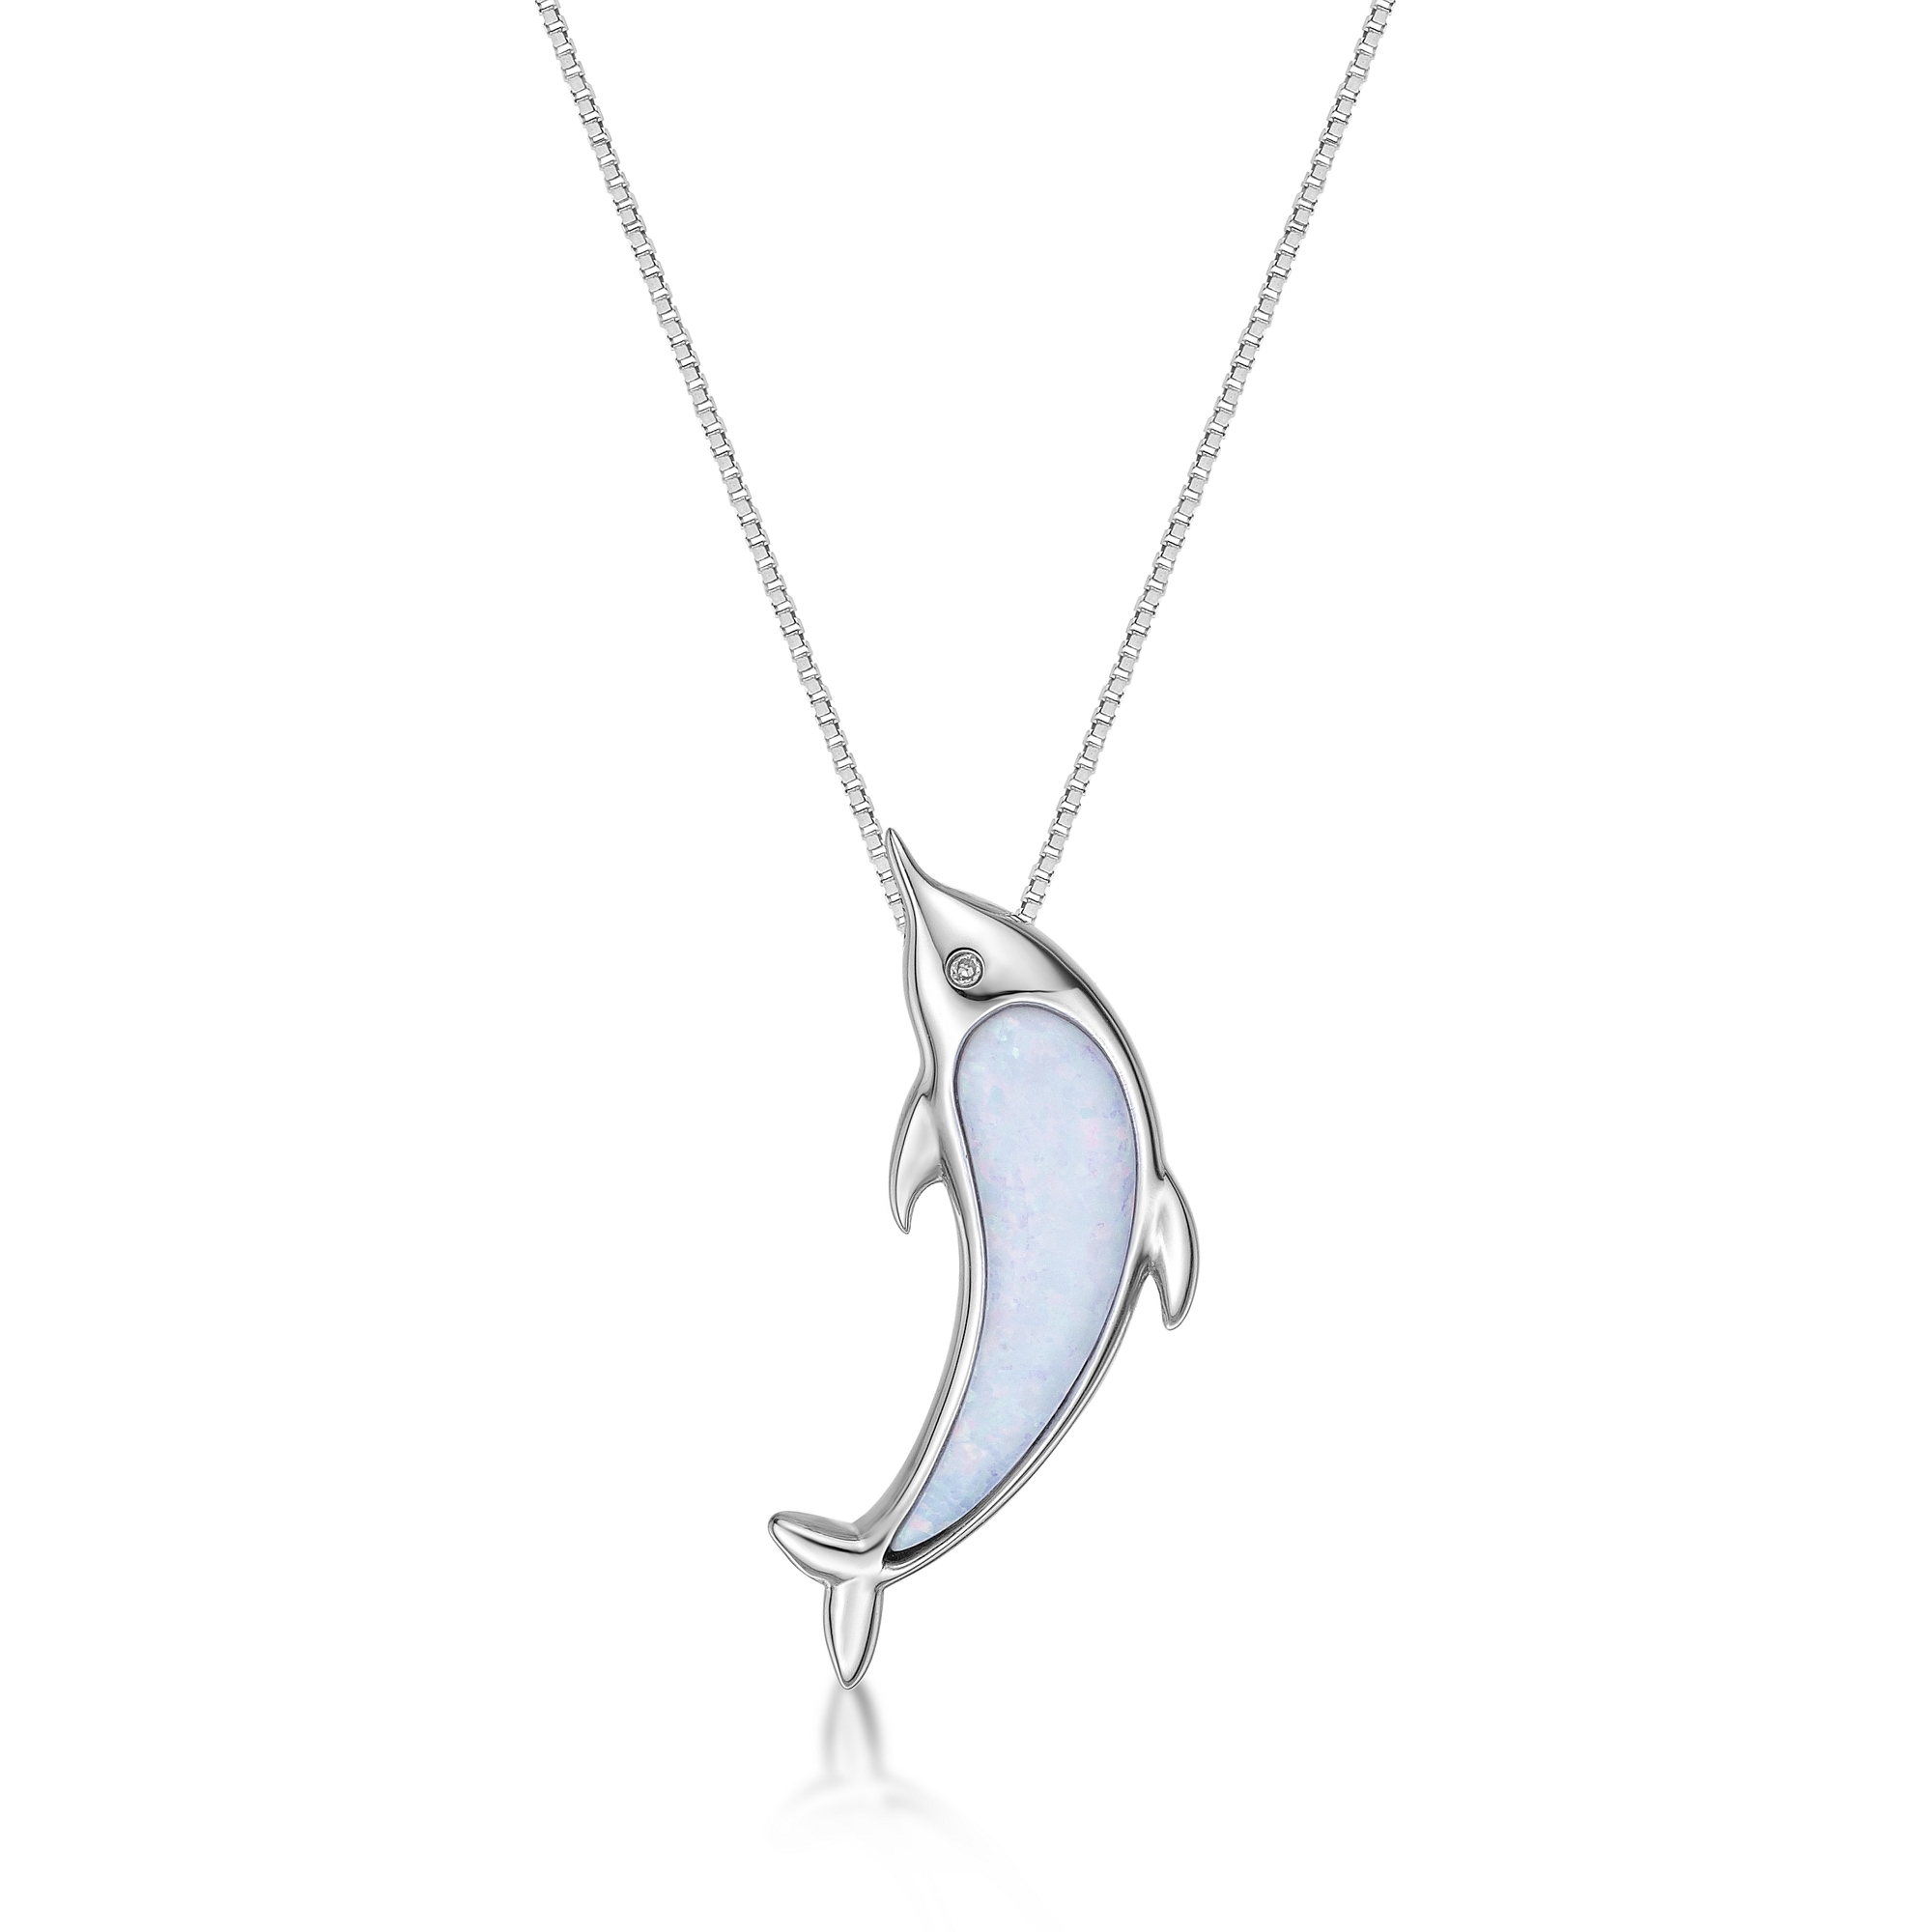 Lavari Jewelers Women's Created White Opal Dolphin Diamond Pendant with Lobster Clasp, Sterling Silver, .003 Cttw, 18 Inch Cable Chain